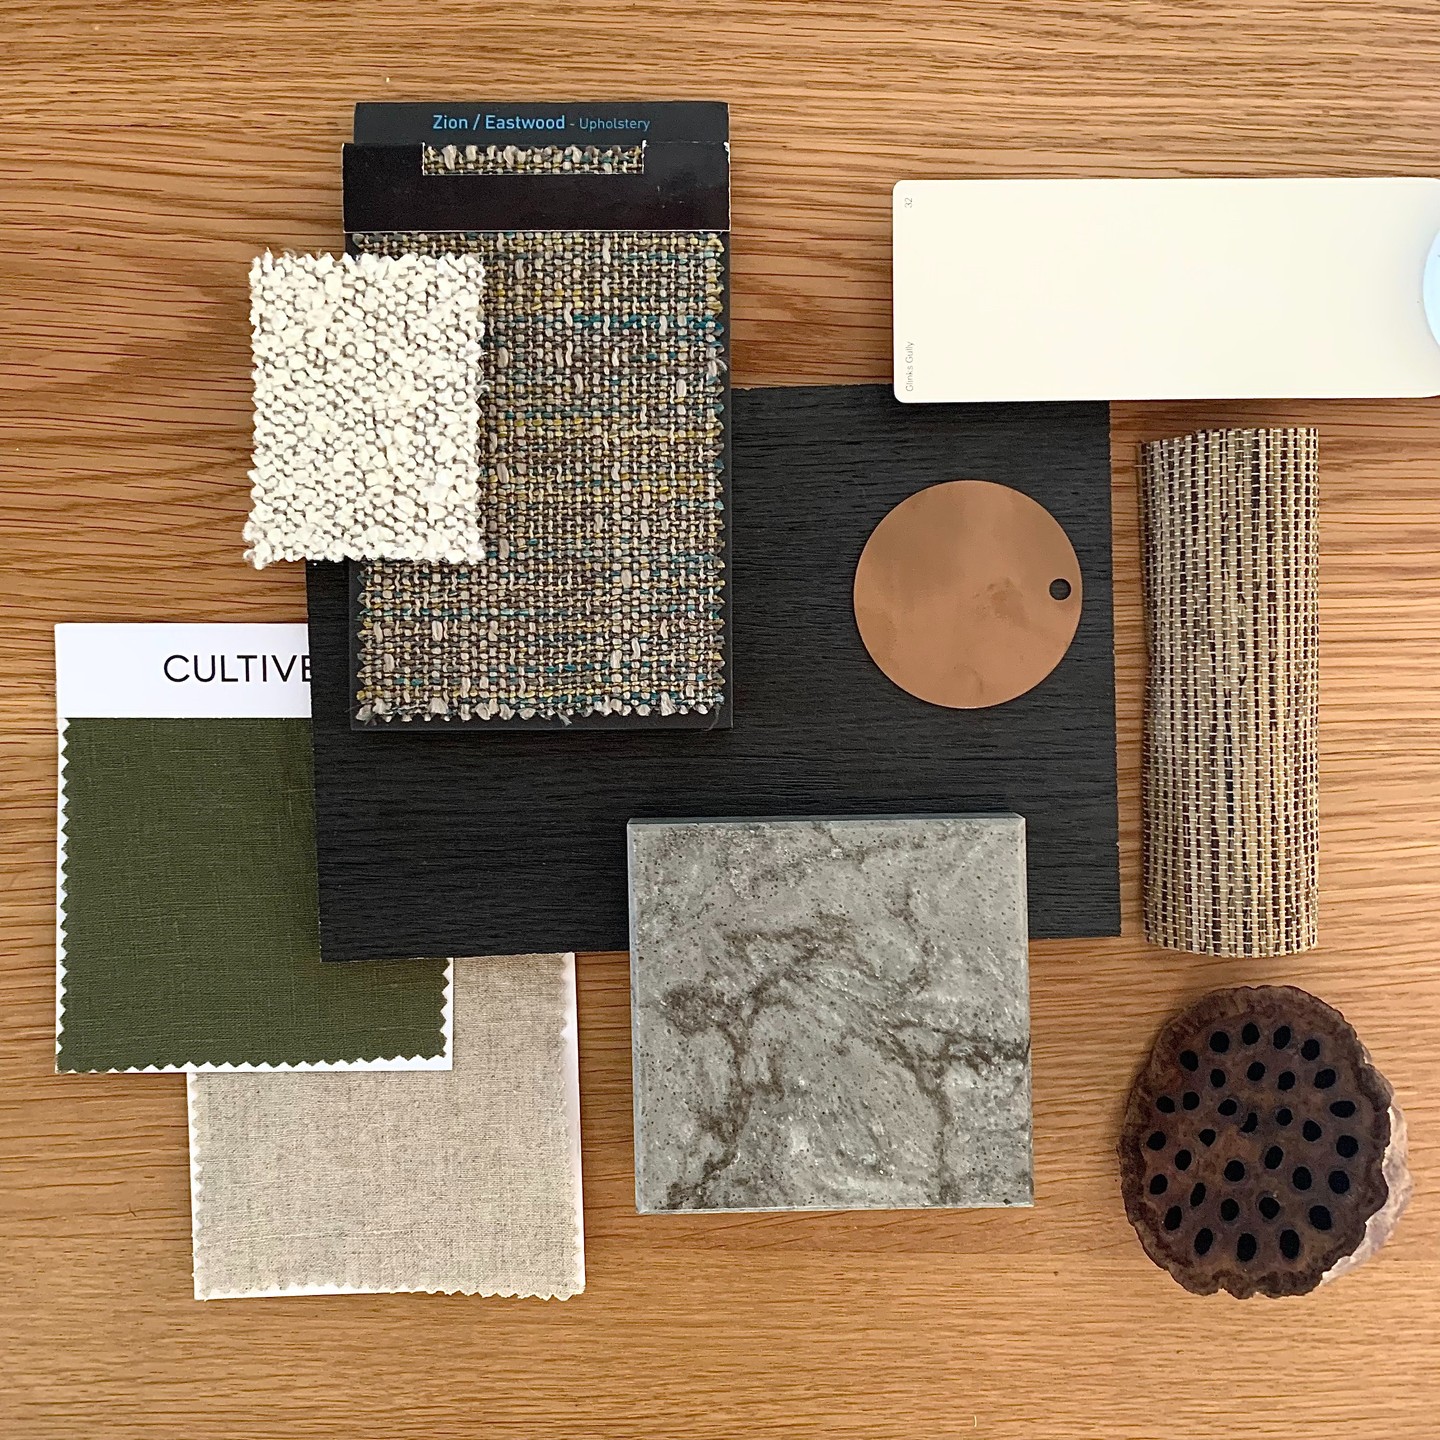 A moody and autumnal palette, eminating warmth and tactility. This flatlay was created for a client who wanted to update his city pad. 
.
.
.
.
📷 by @newtonandkay 
#newtonandkay #flatlay #interiordesign #textile #copper #kitchendesign #cabinetry #fabric #earthytones #autumn #oak #linen #homedecor #interiordesignnz  #homestyle #kitchendesign #greenbeauty #copper #lotus #designinspo #renovation #renovationinspiration #homerenovation #renovationproject #howyouhome